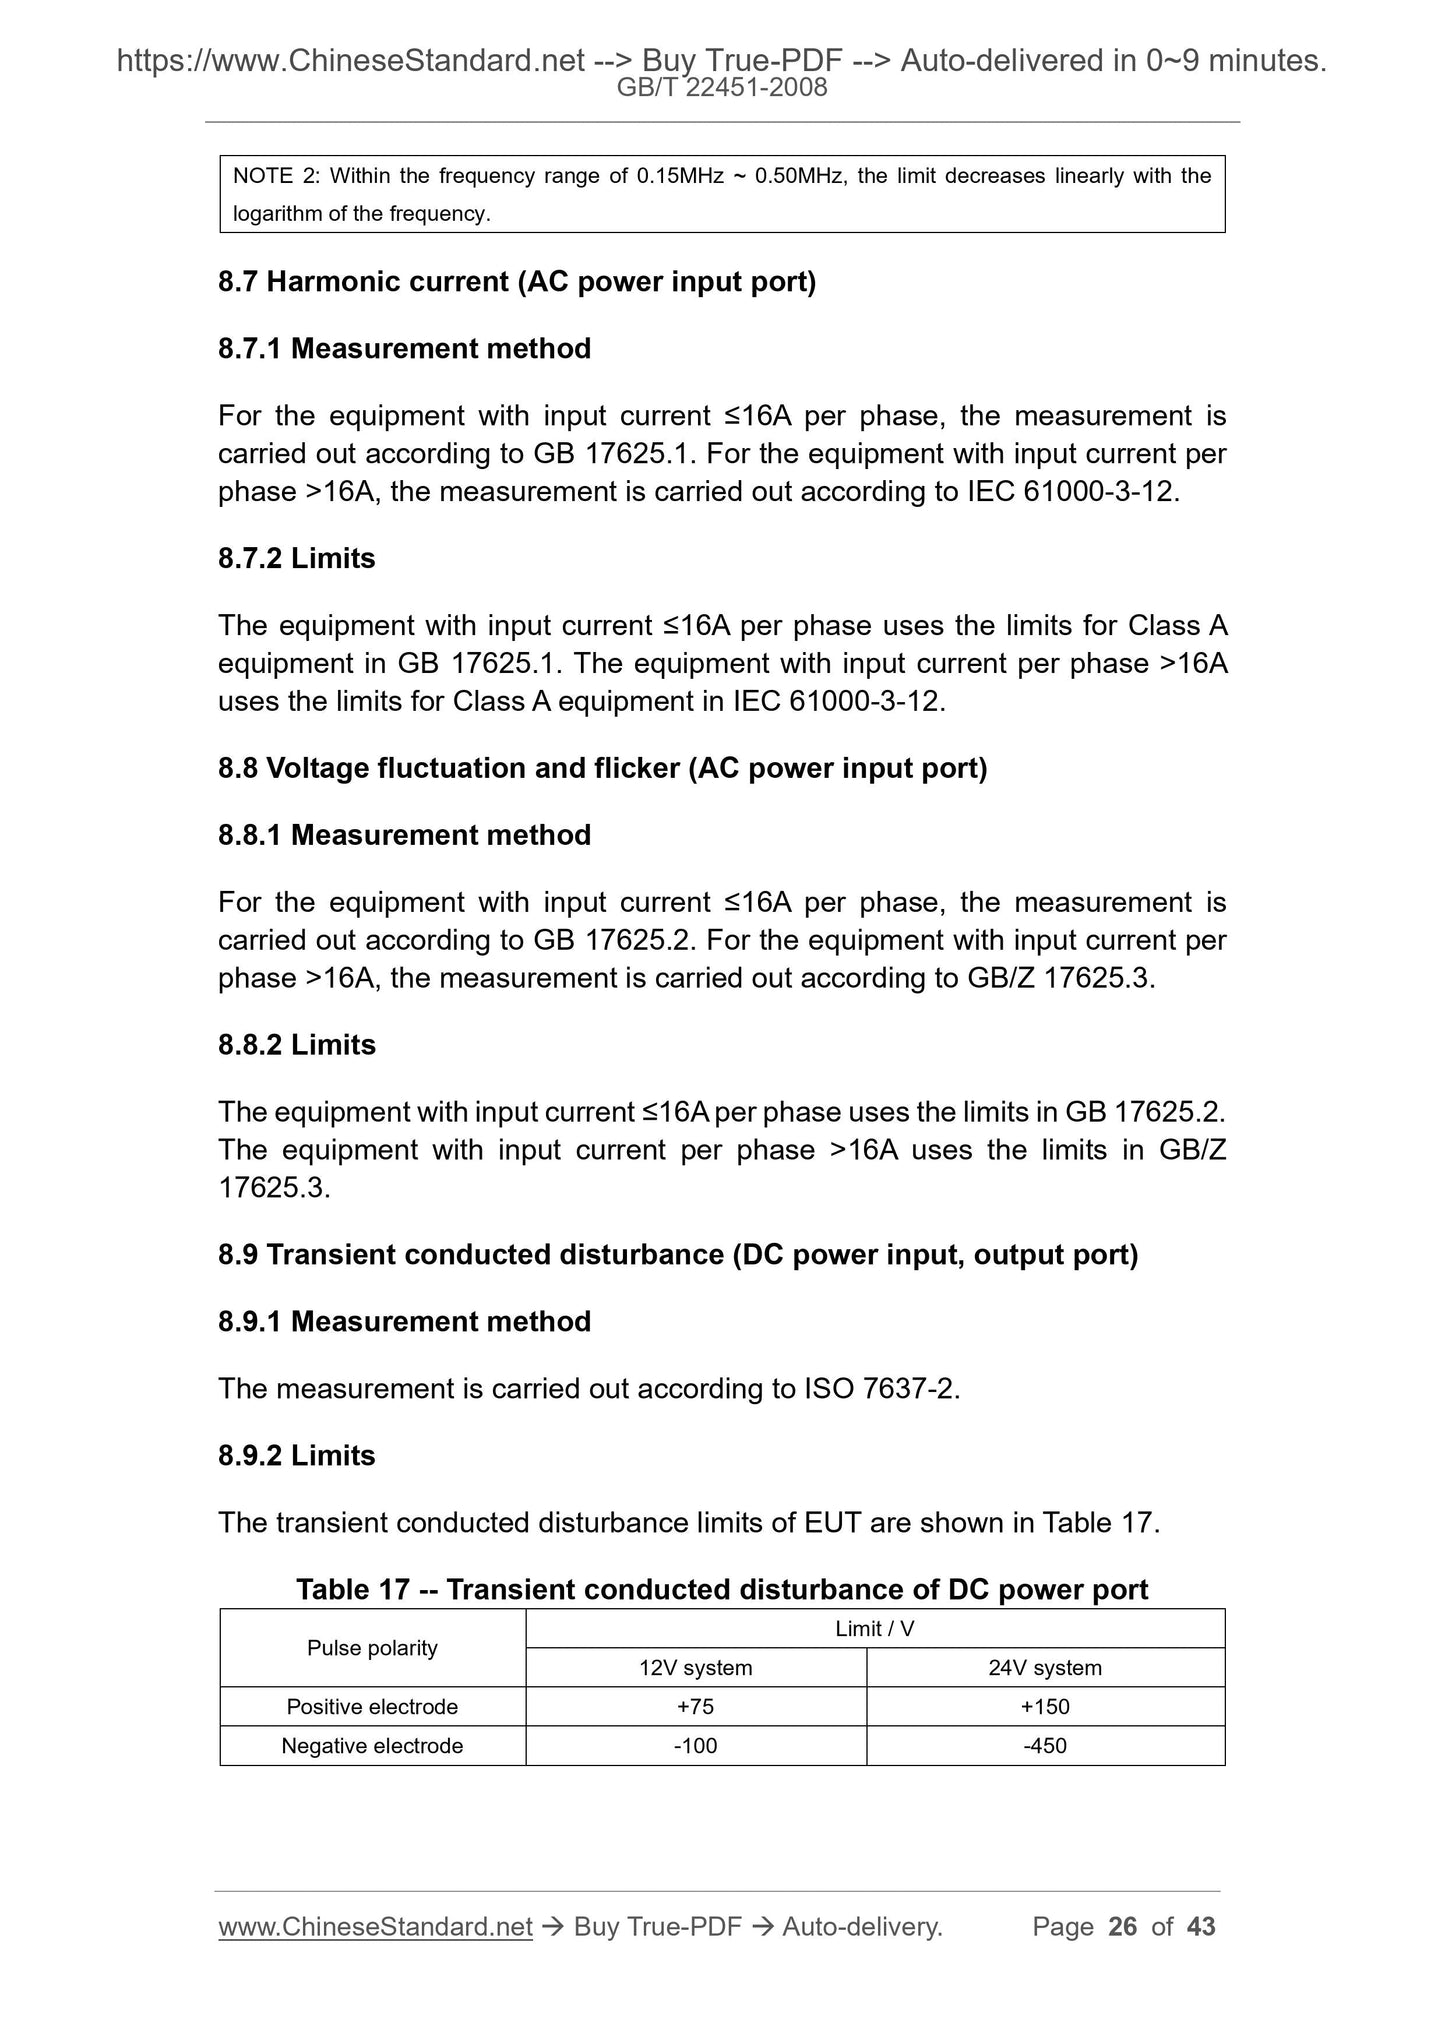 GB/T 22451-2008 Page 11